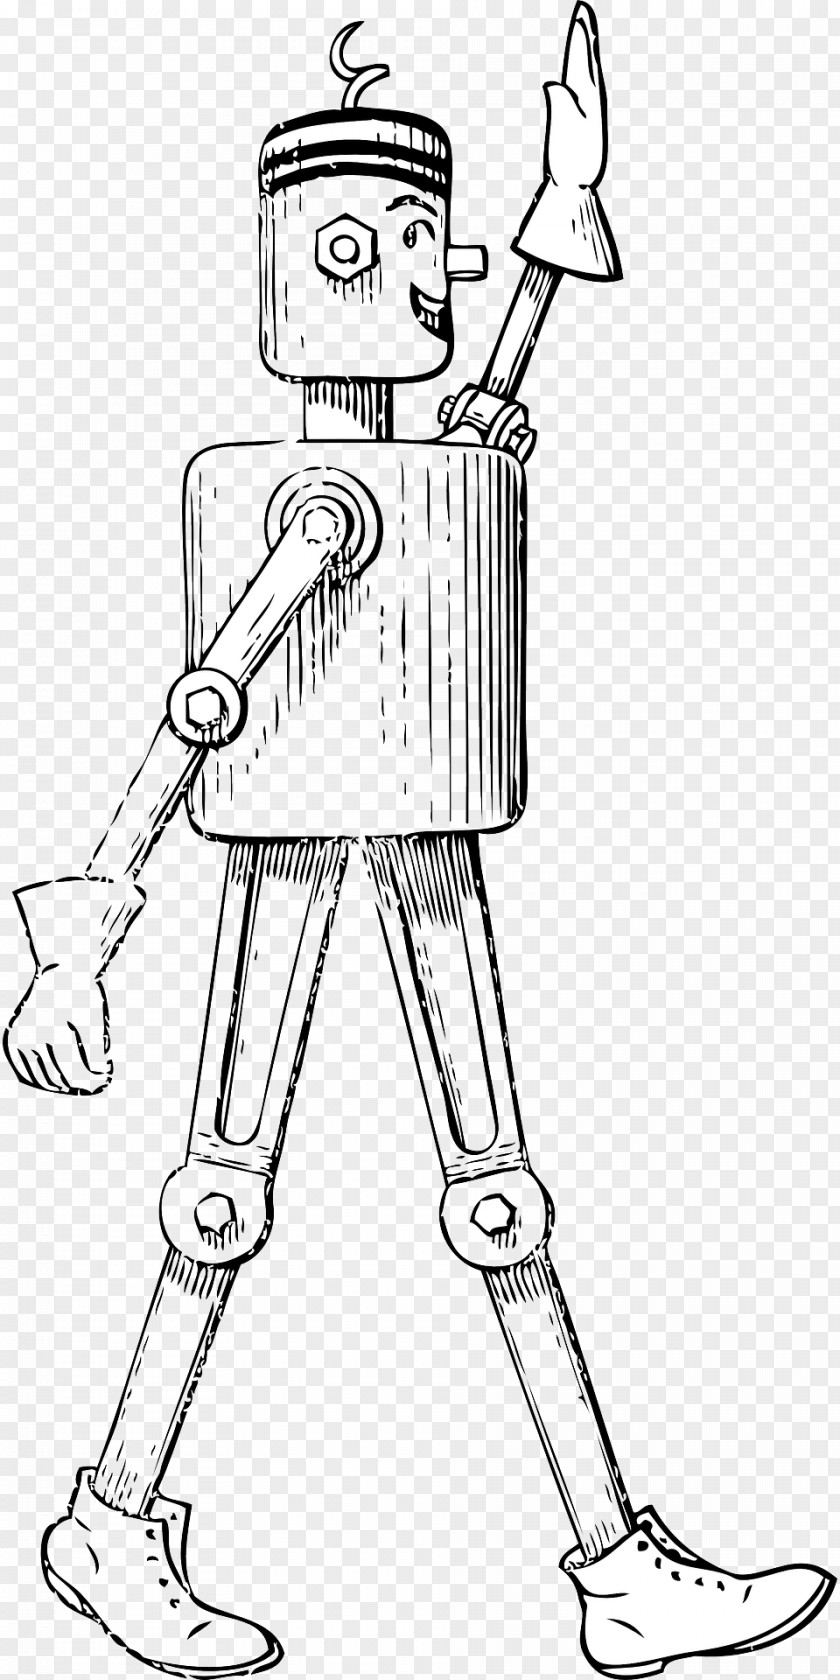 Hello Robot Man Page Clip Art PNG